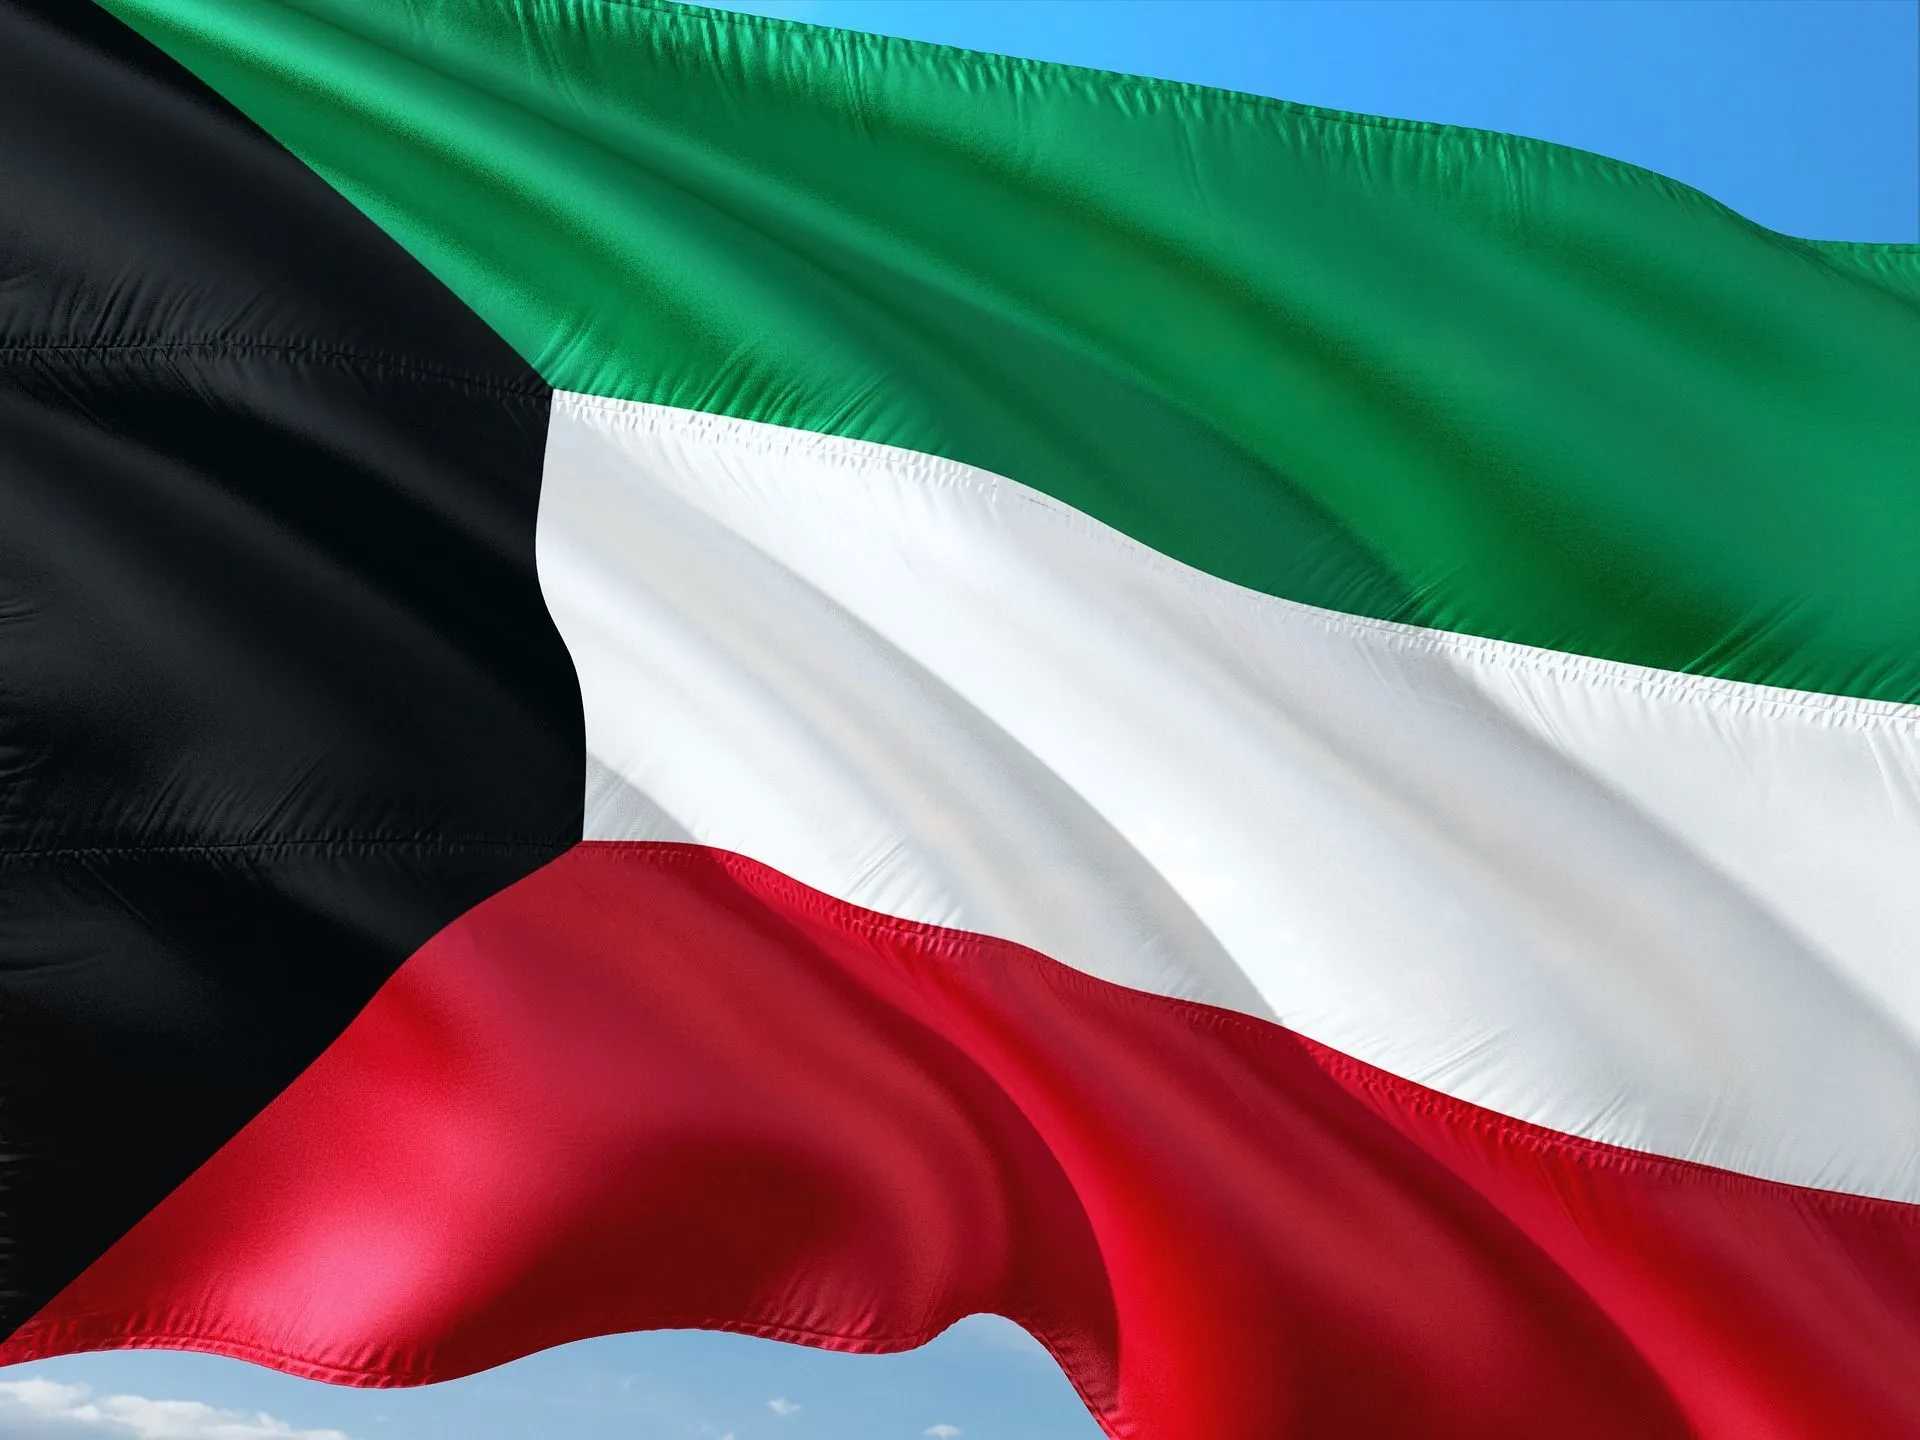 Kuwait is one of the richest countries in the Middle East.